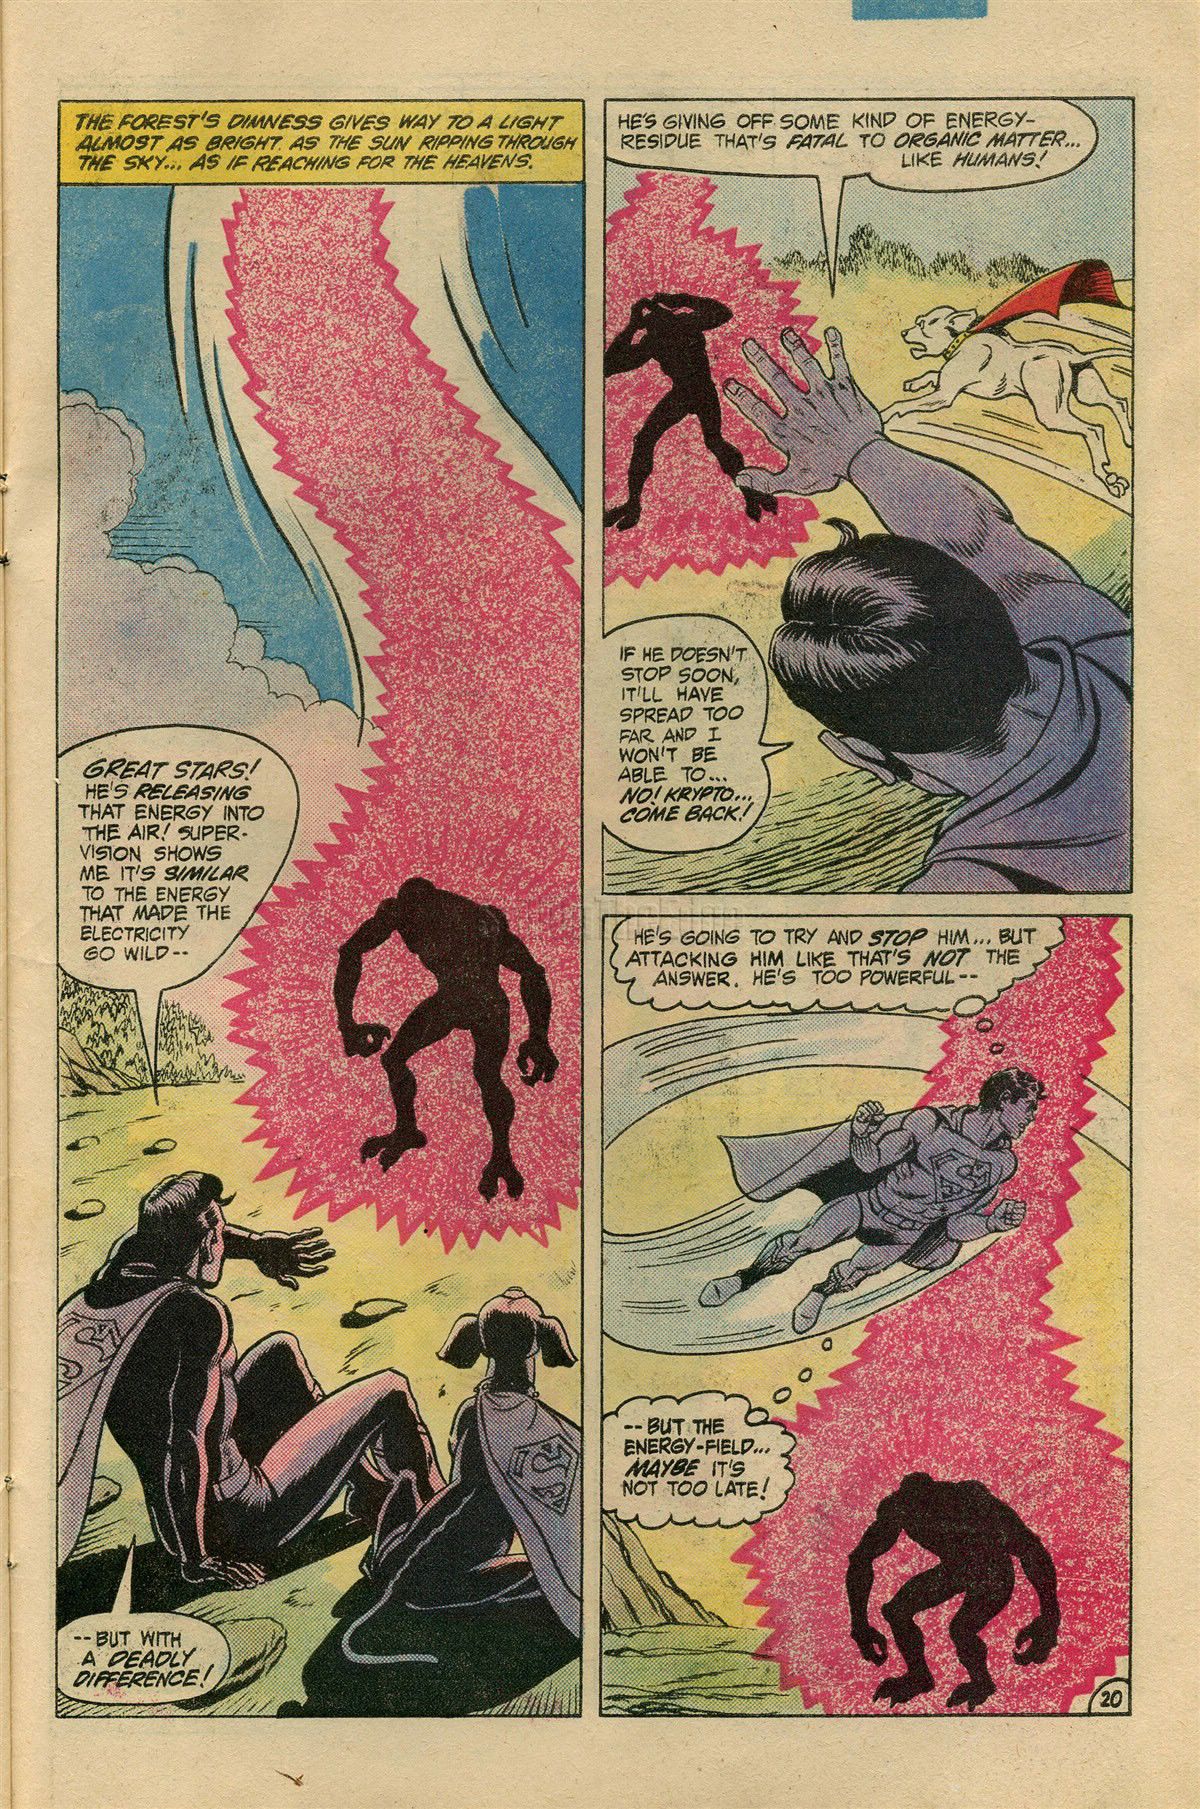 The New Adventures of Superboy 52 Page 25